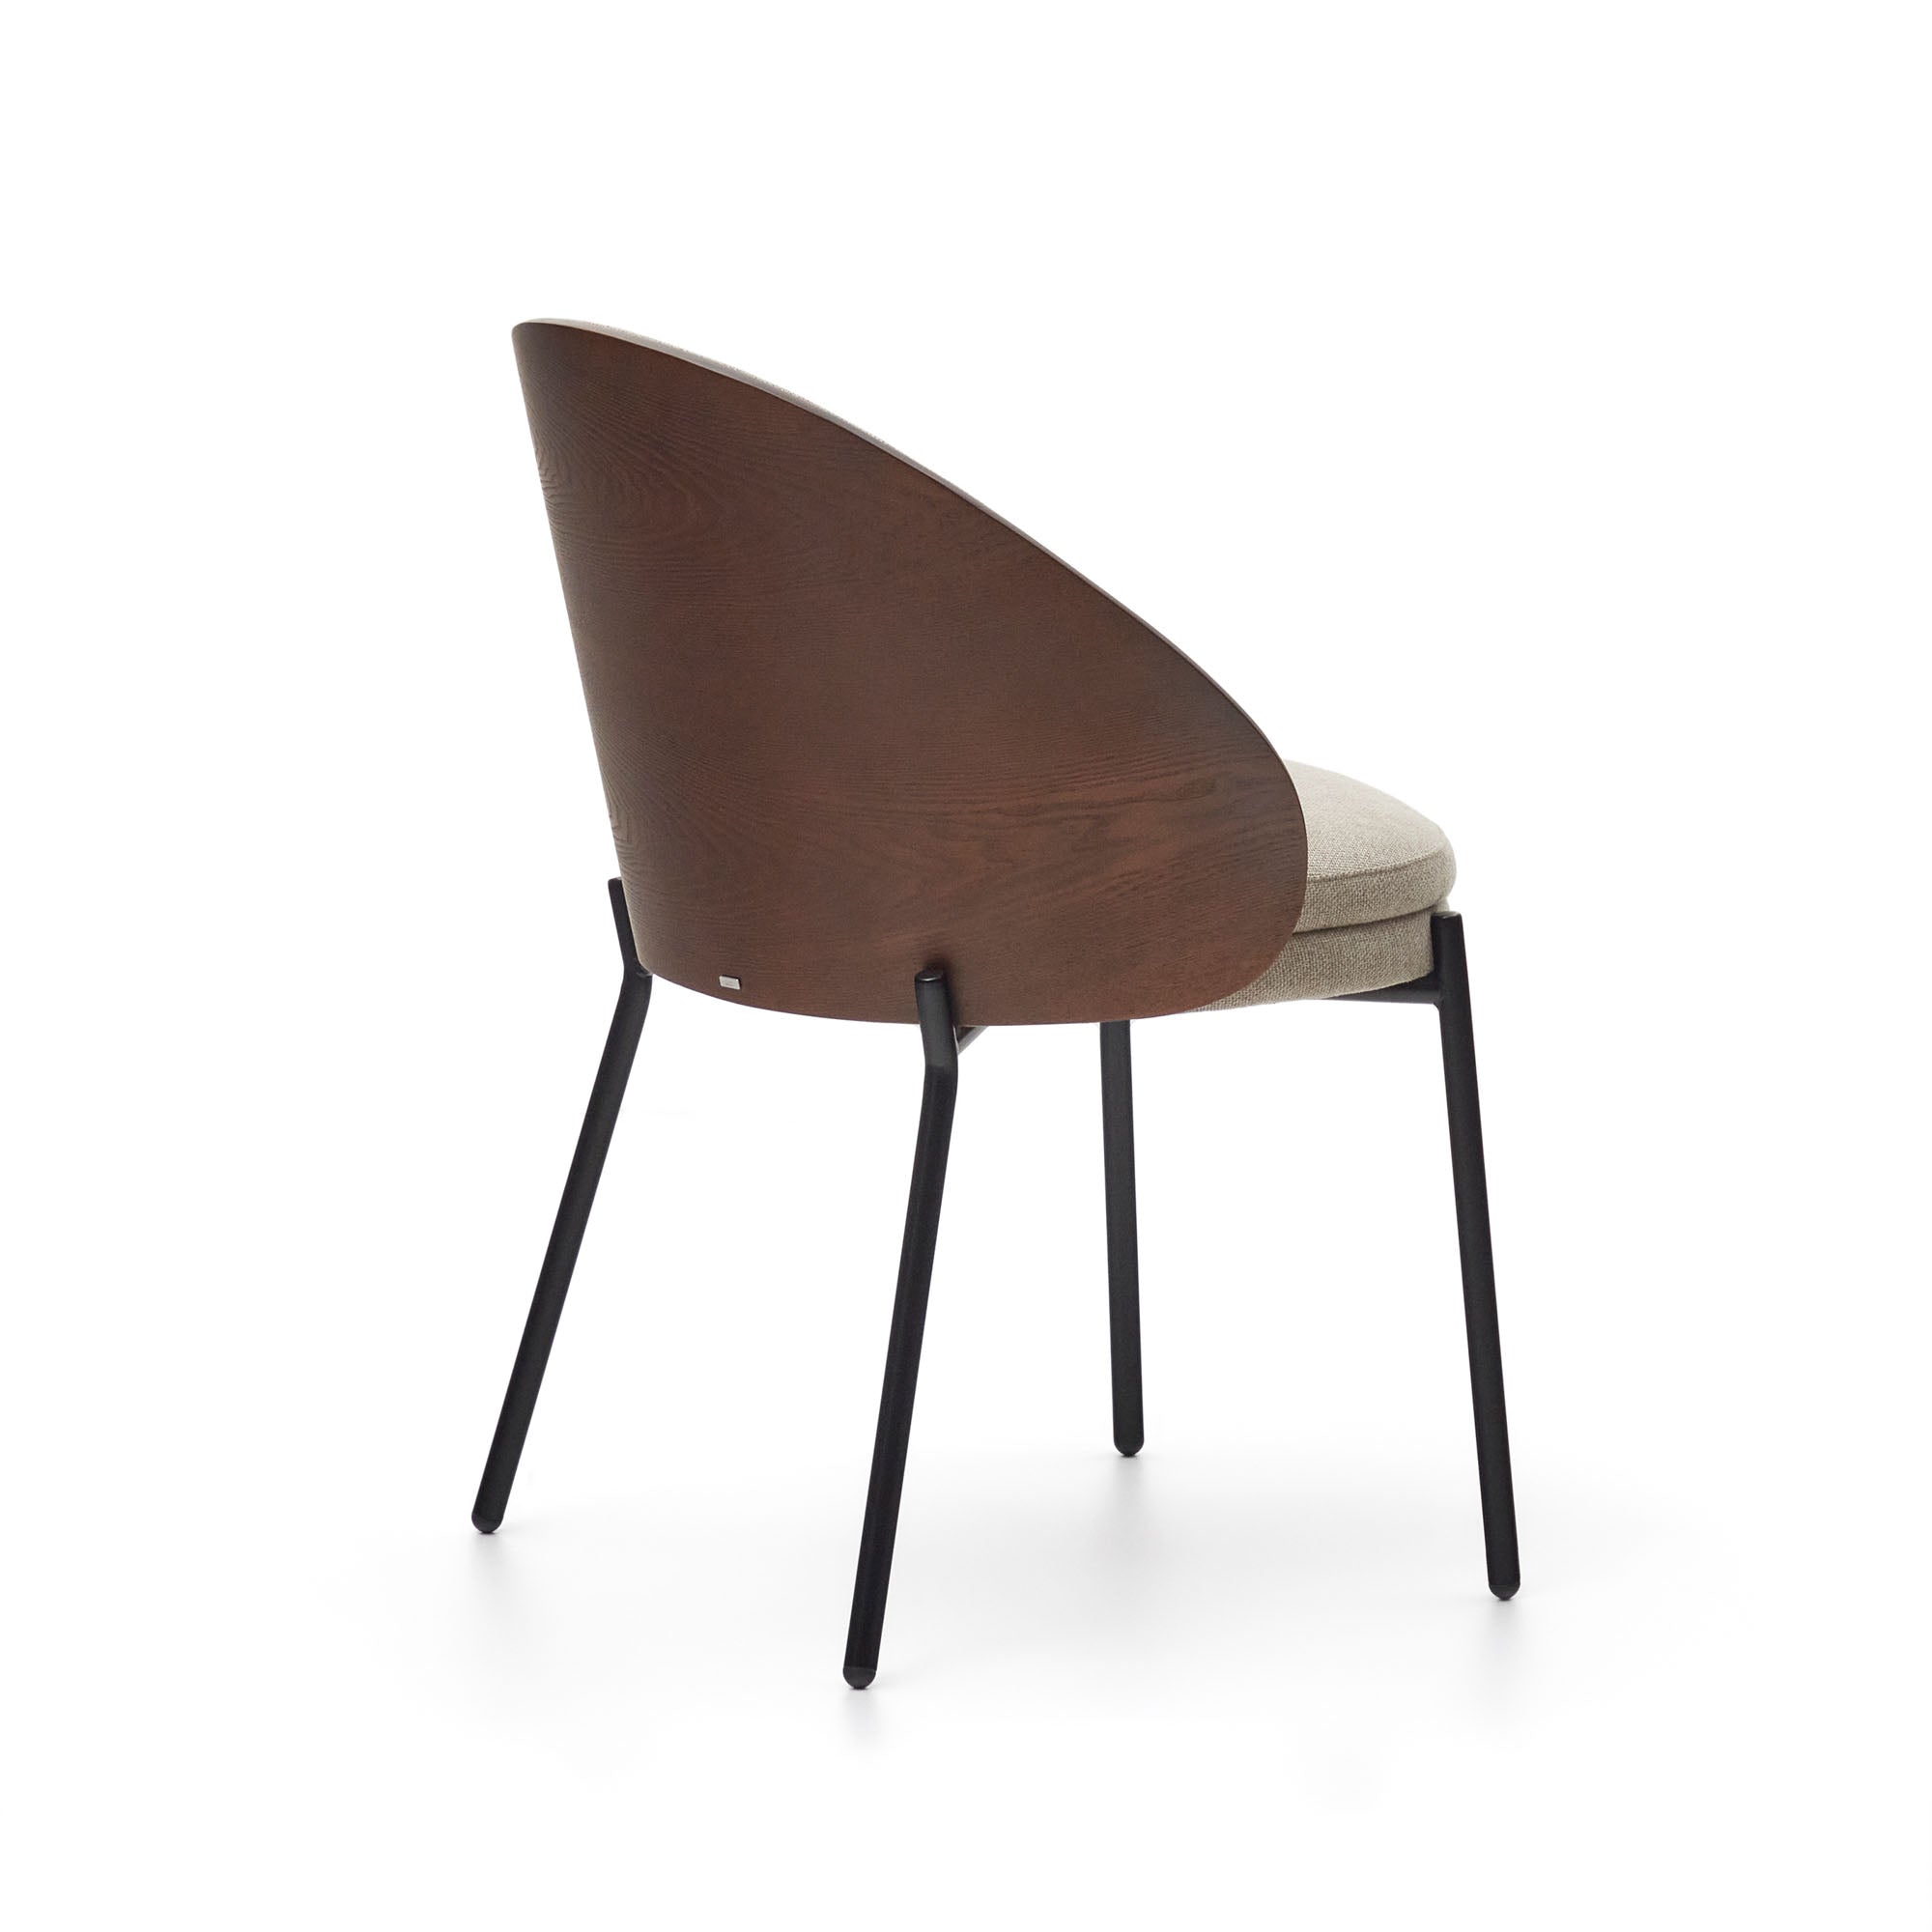 Eamy light brown chair in an ash wood veneer with a wenge finish and black metal